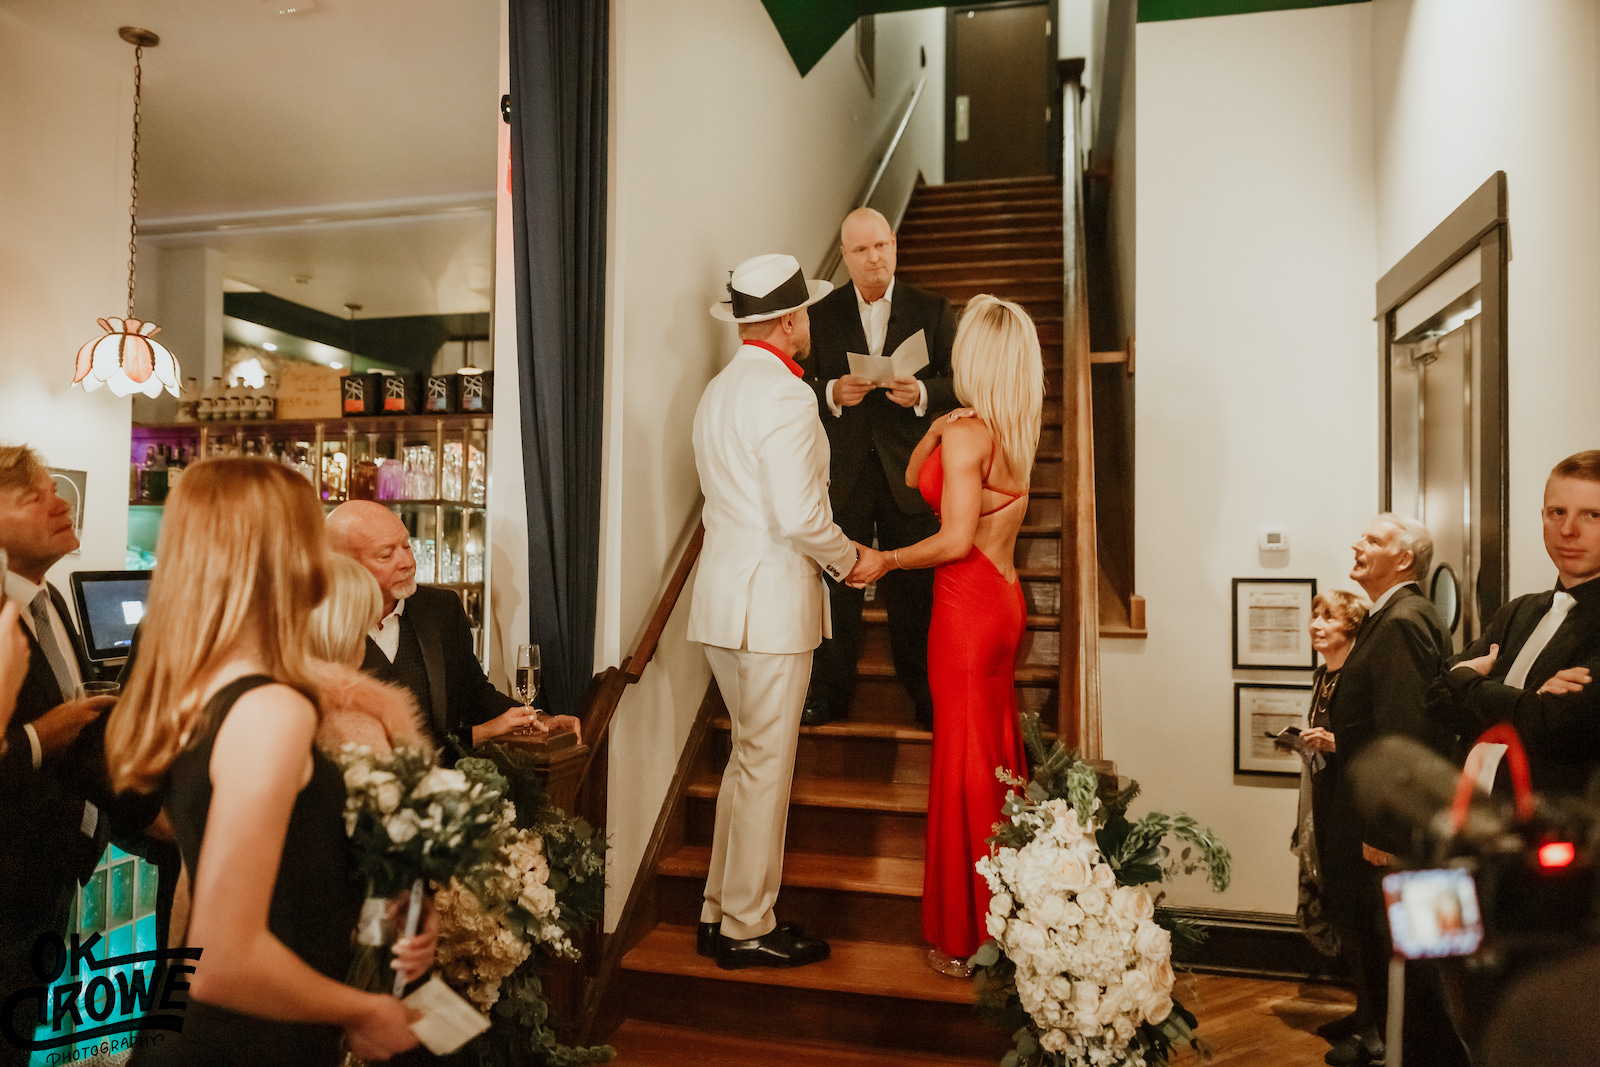 Diamond Dallas Page's surprise wedding to Payge McMahon at The Dwell Hotel in downtown Chattanooga